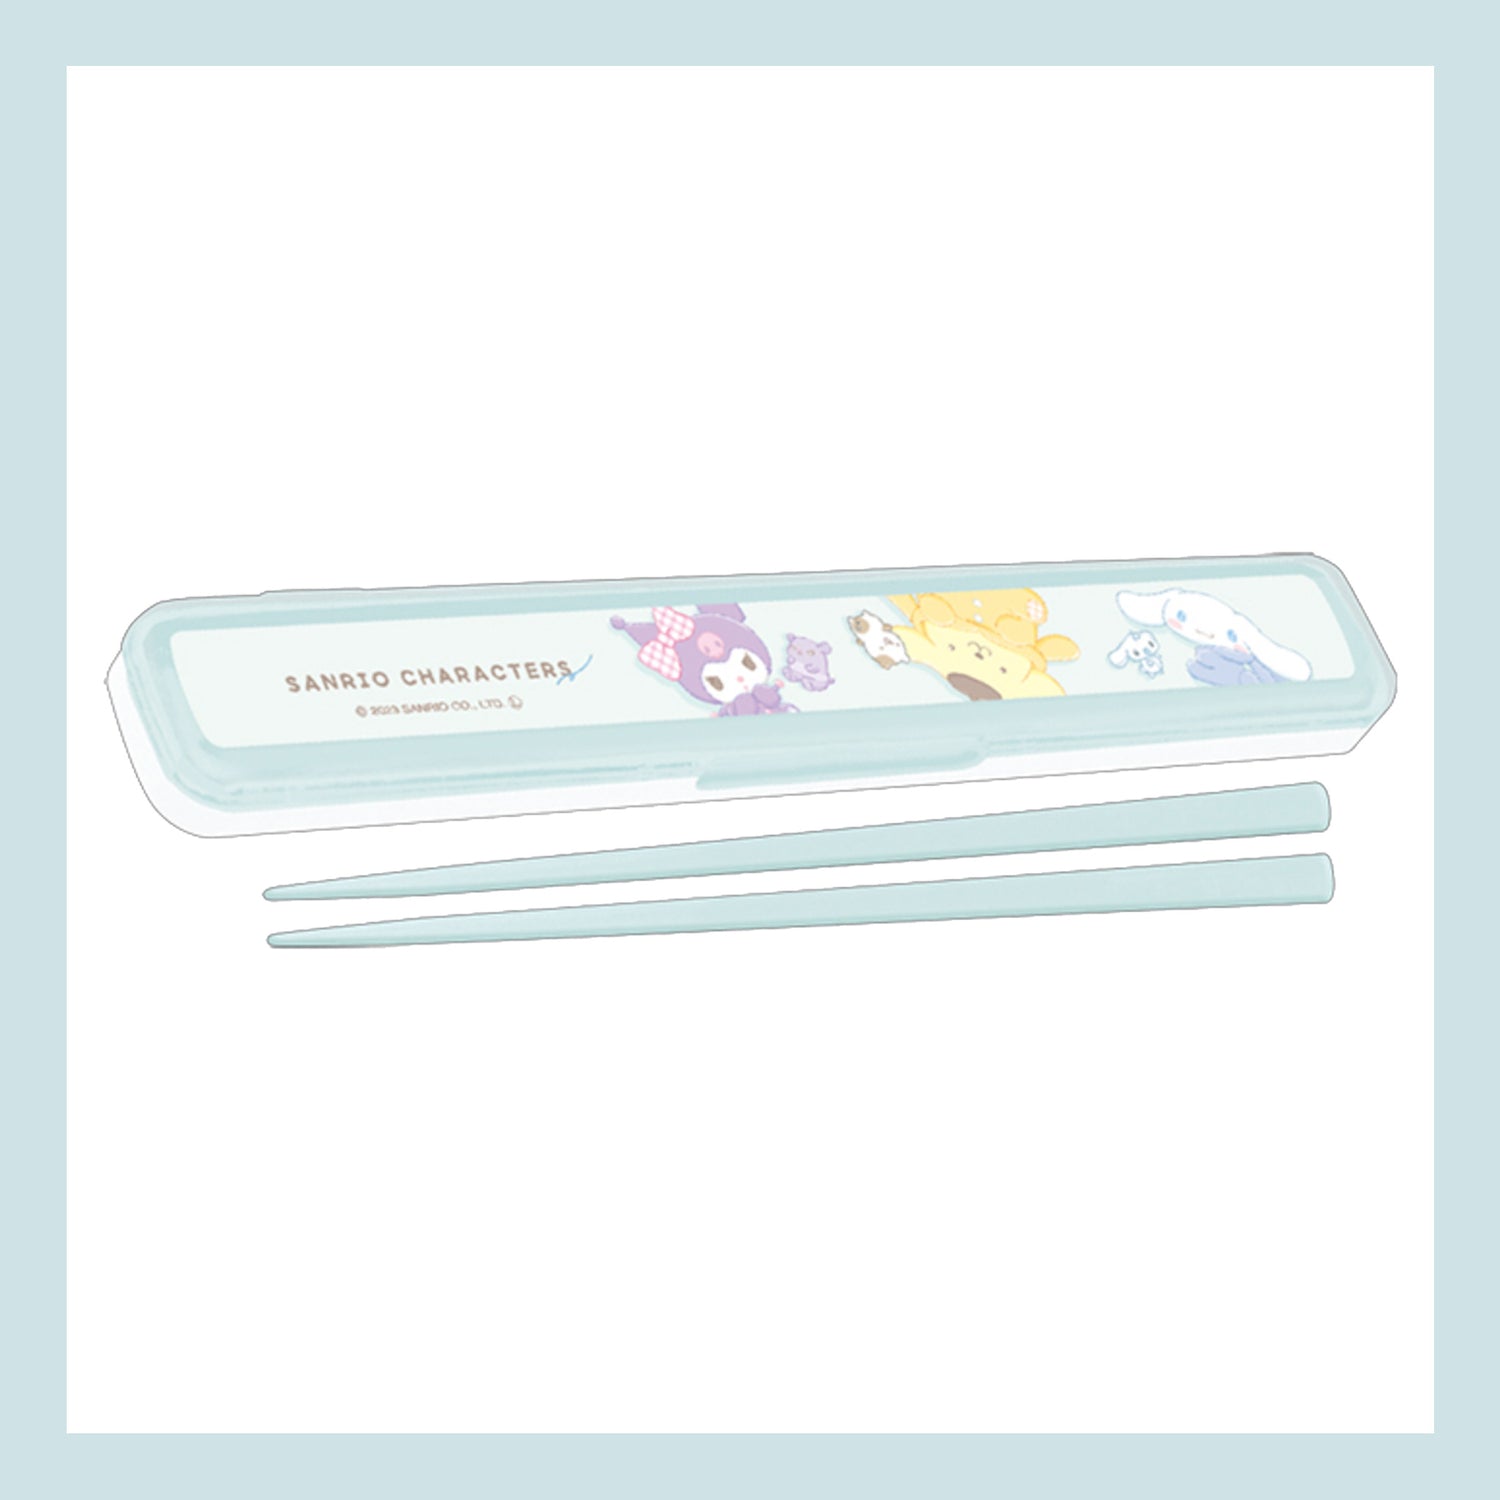 Sanrio Characters chopsticks and chopstick case